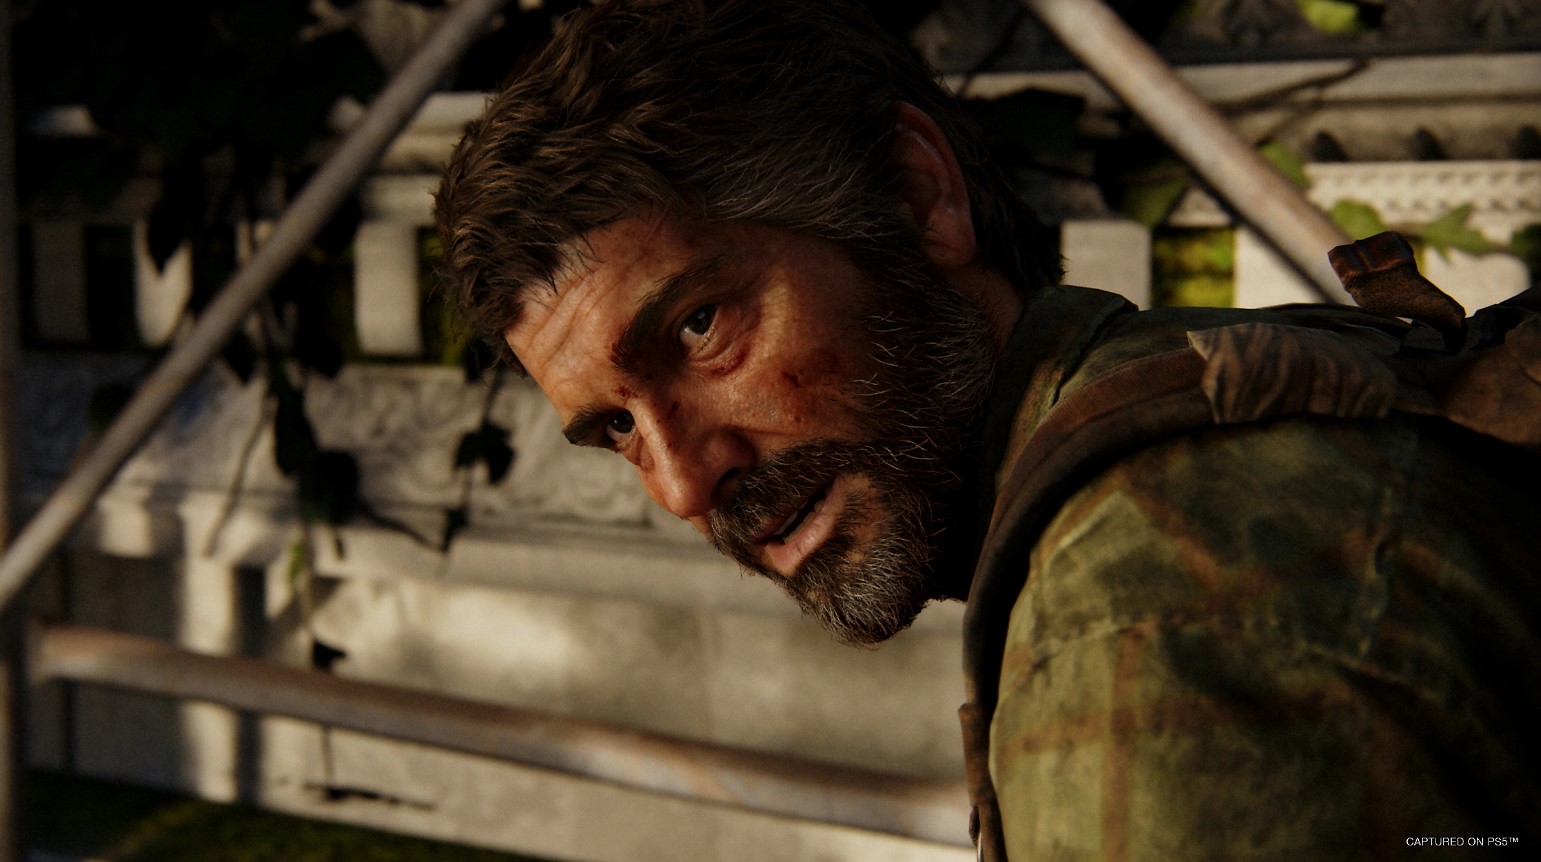 Naughty Dog Shuts Down Development of The Last of Us Online